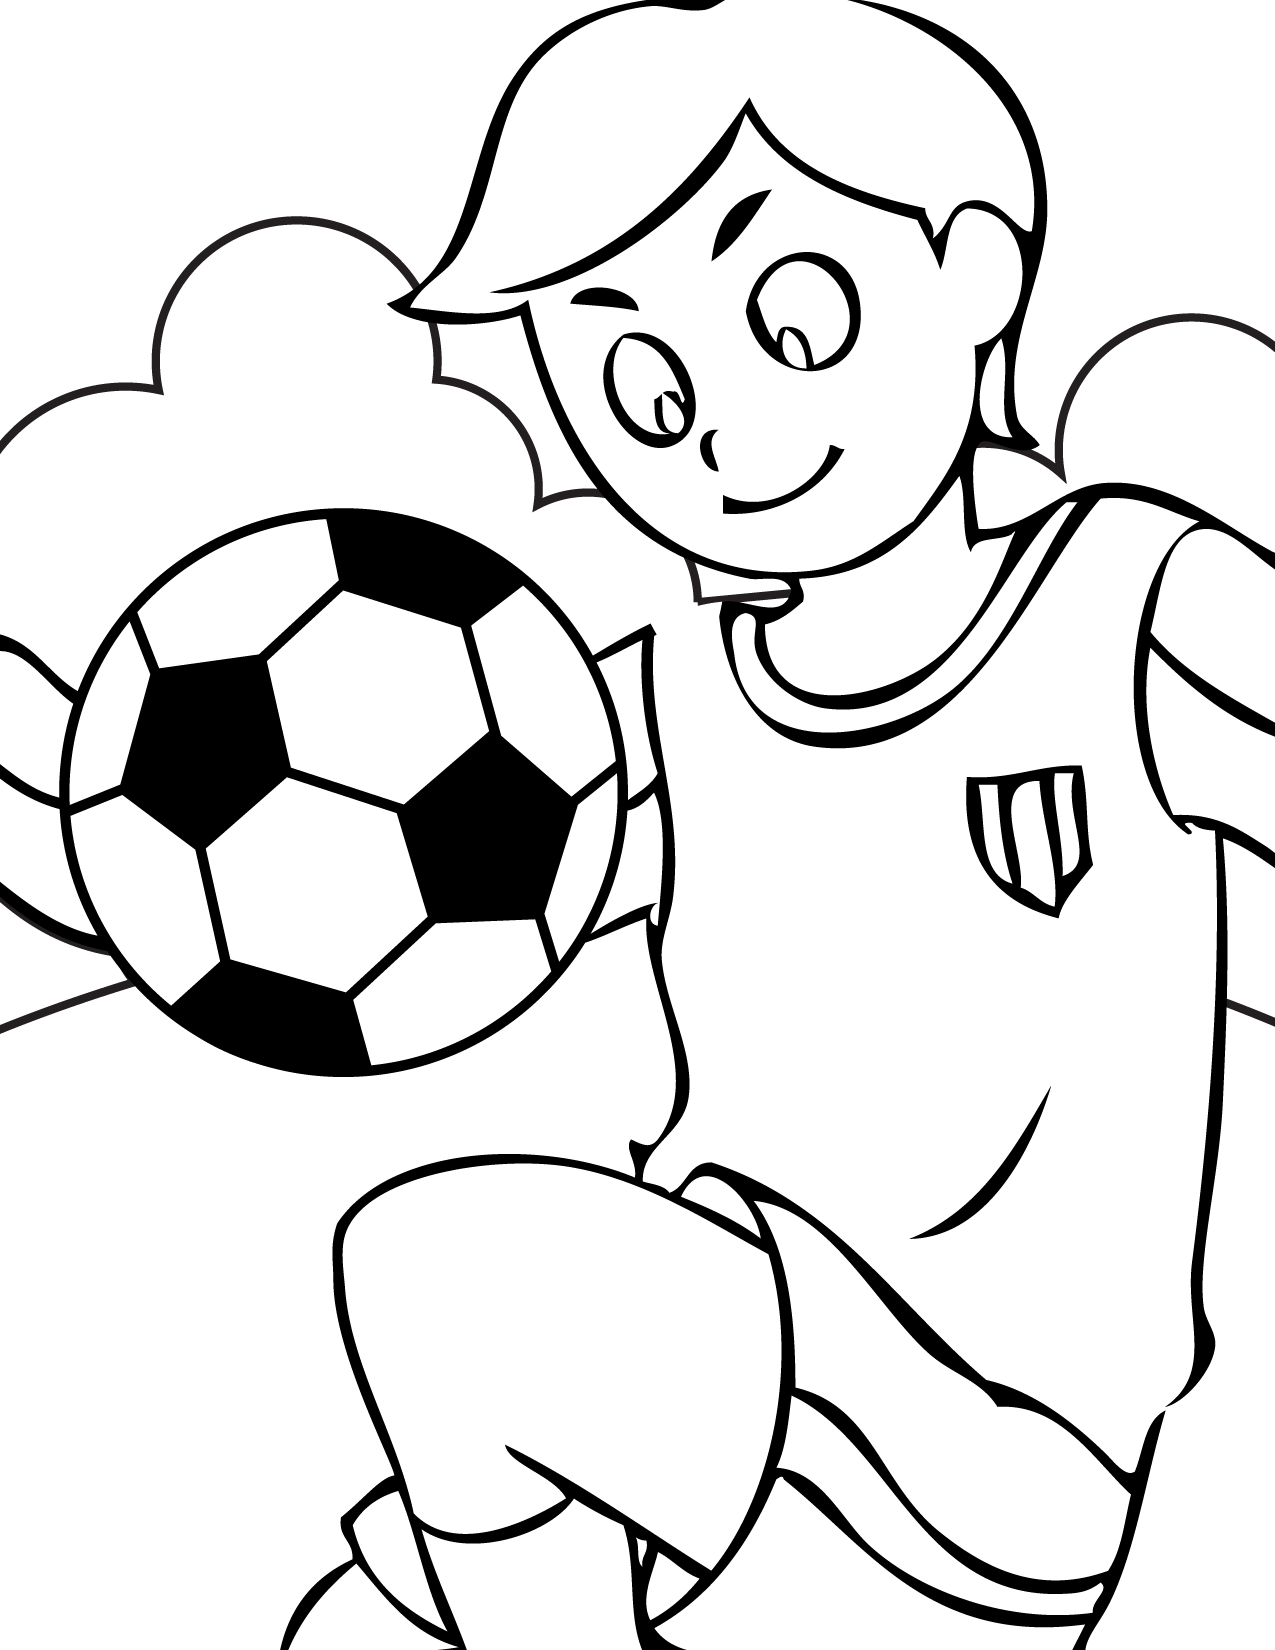 soccer-printable-coloring-pages